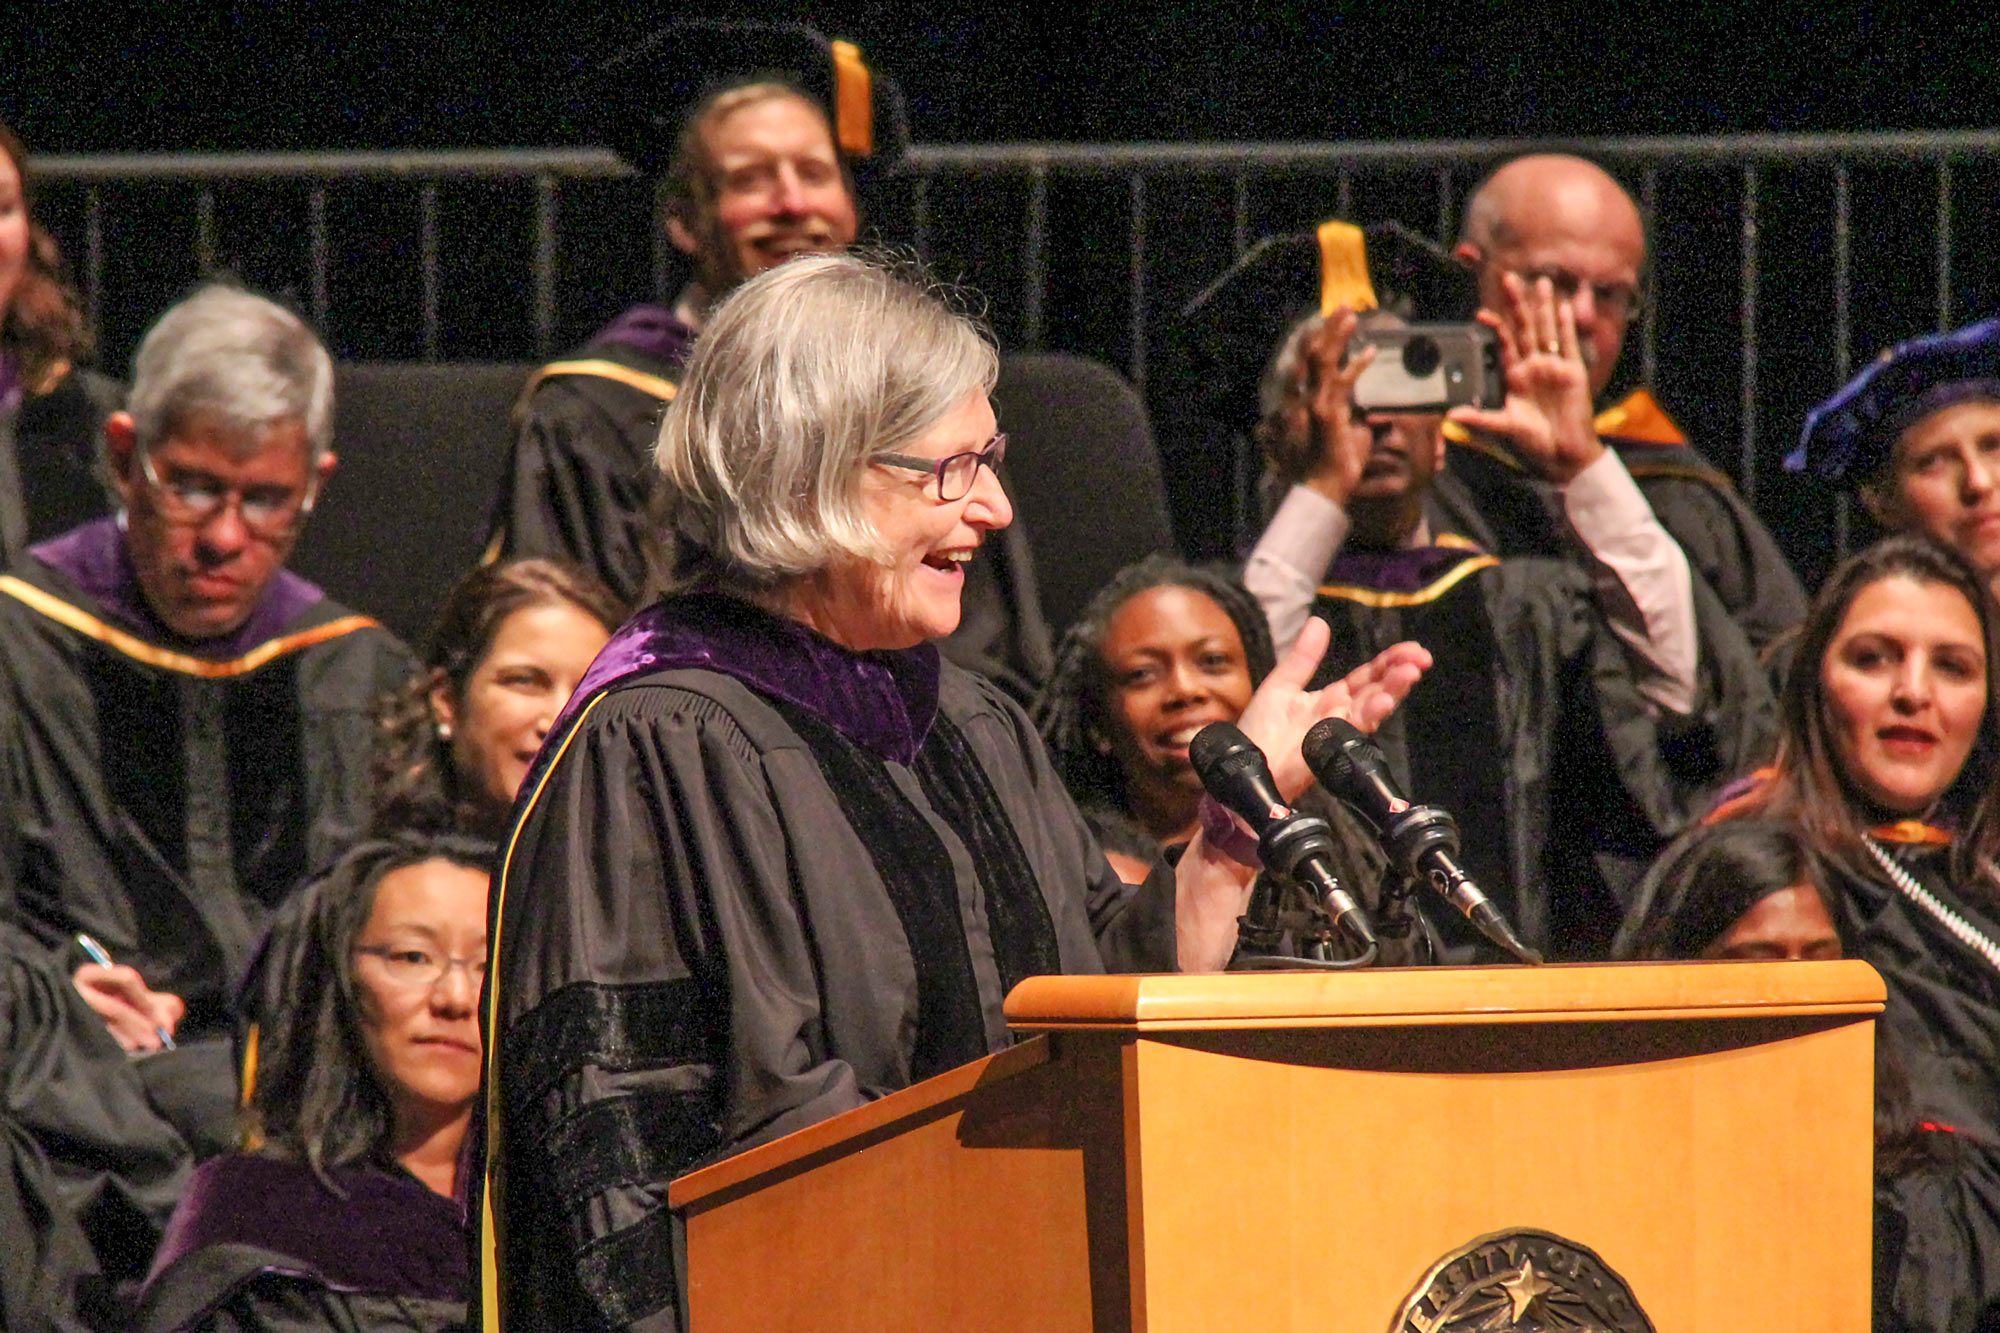 Sister Simone delivering commencement speech at UC Davis